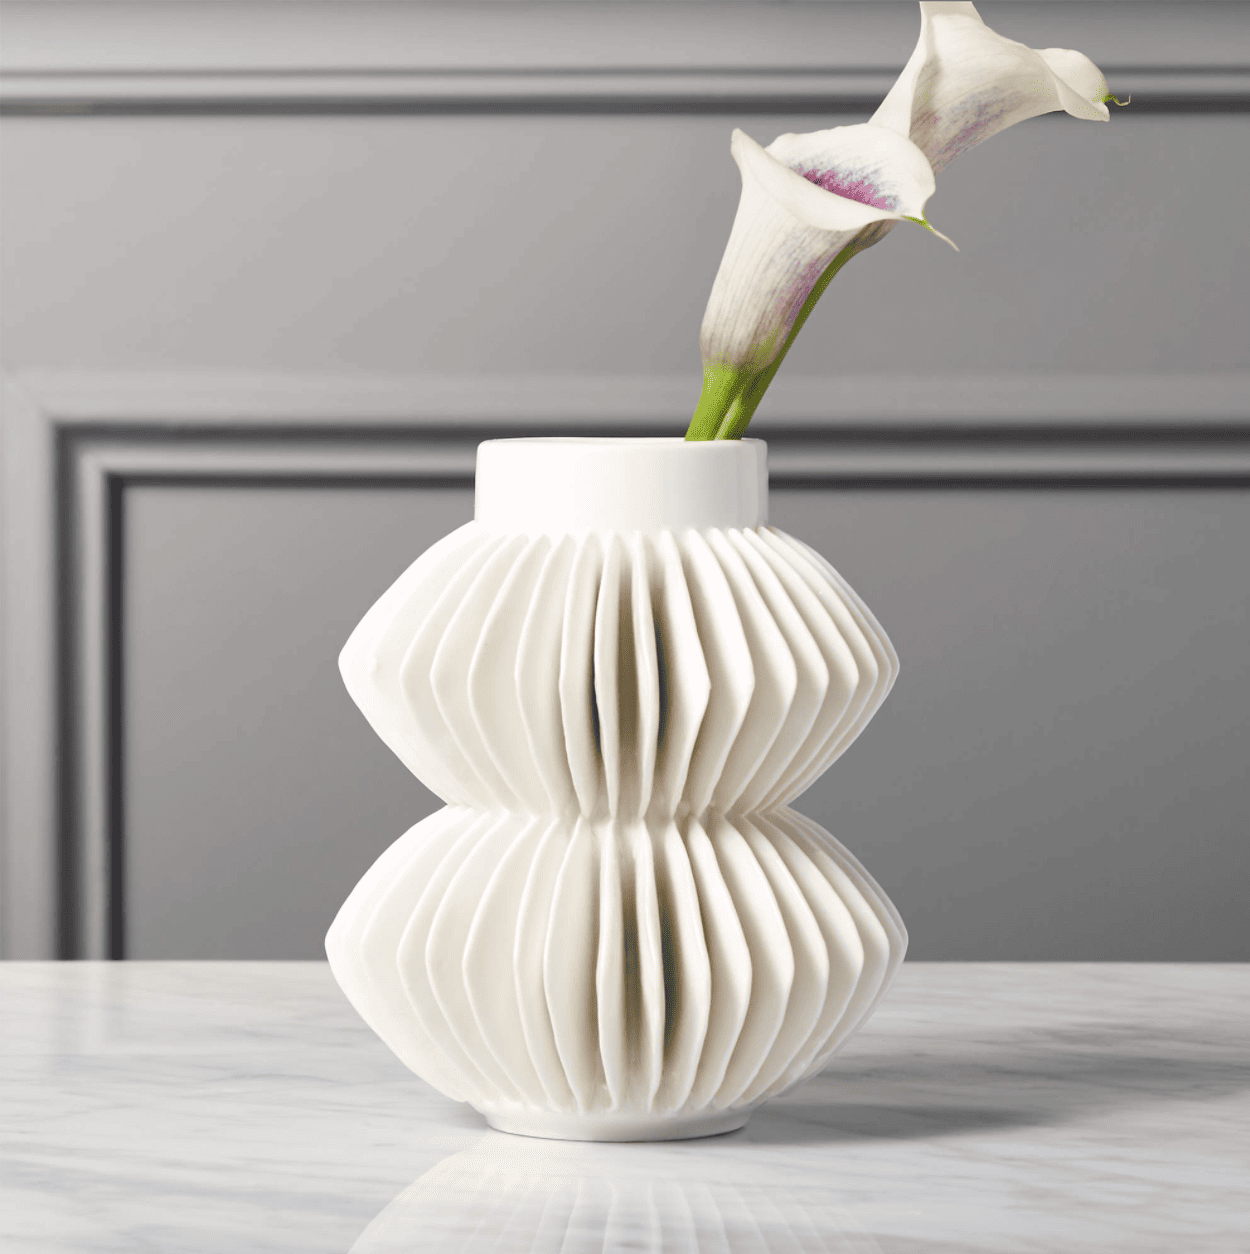 A white vase with ceramic, fan-like fins sits on a table. Two calla lilies are inside.